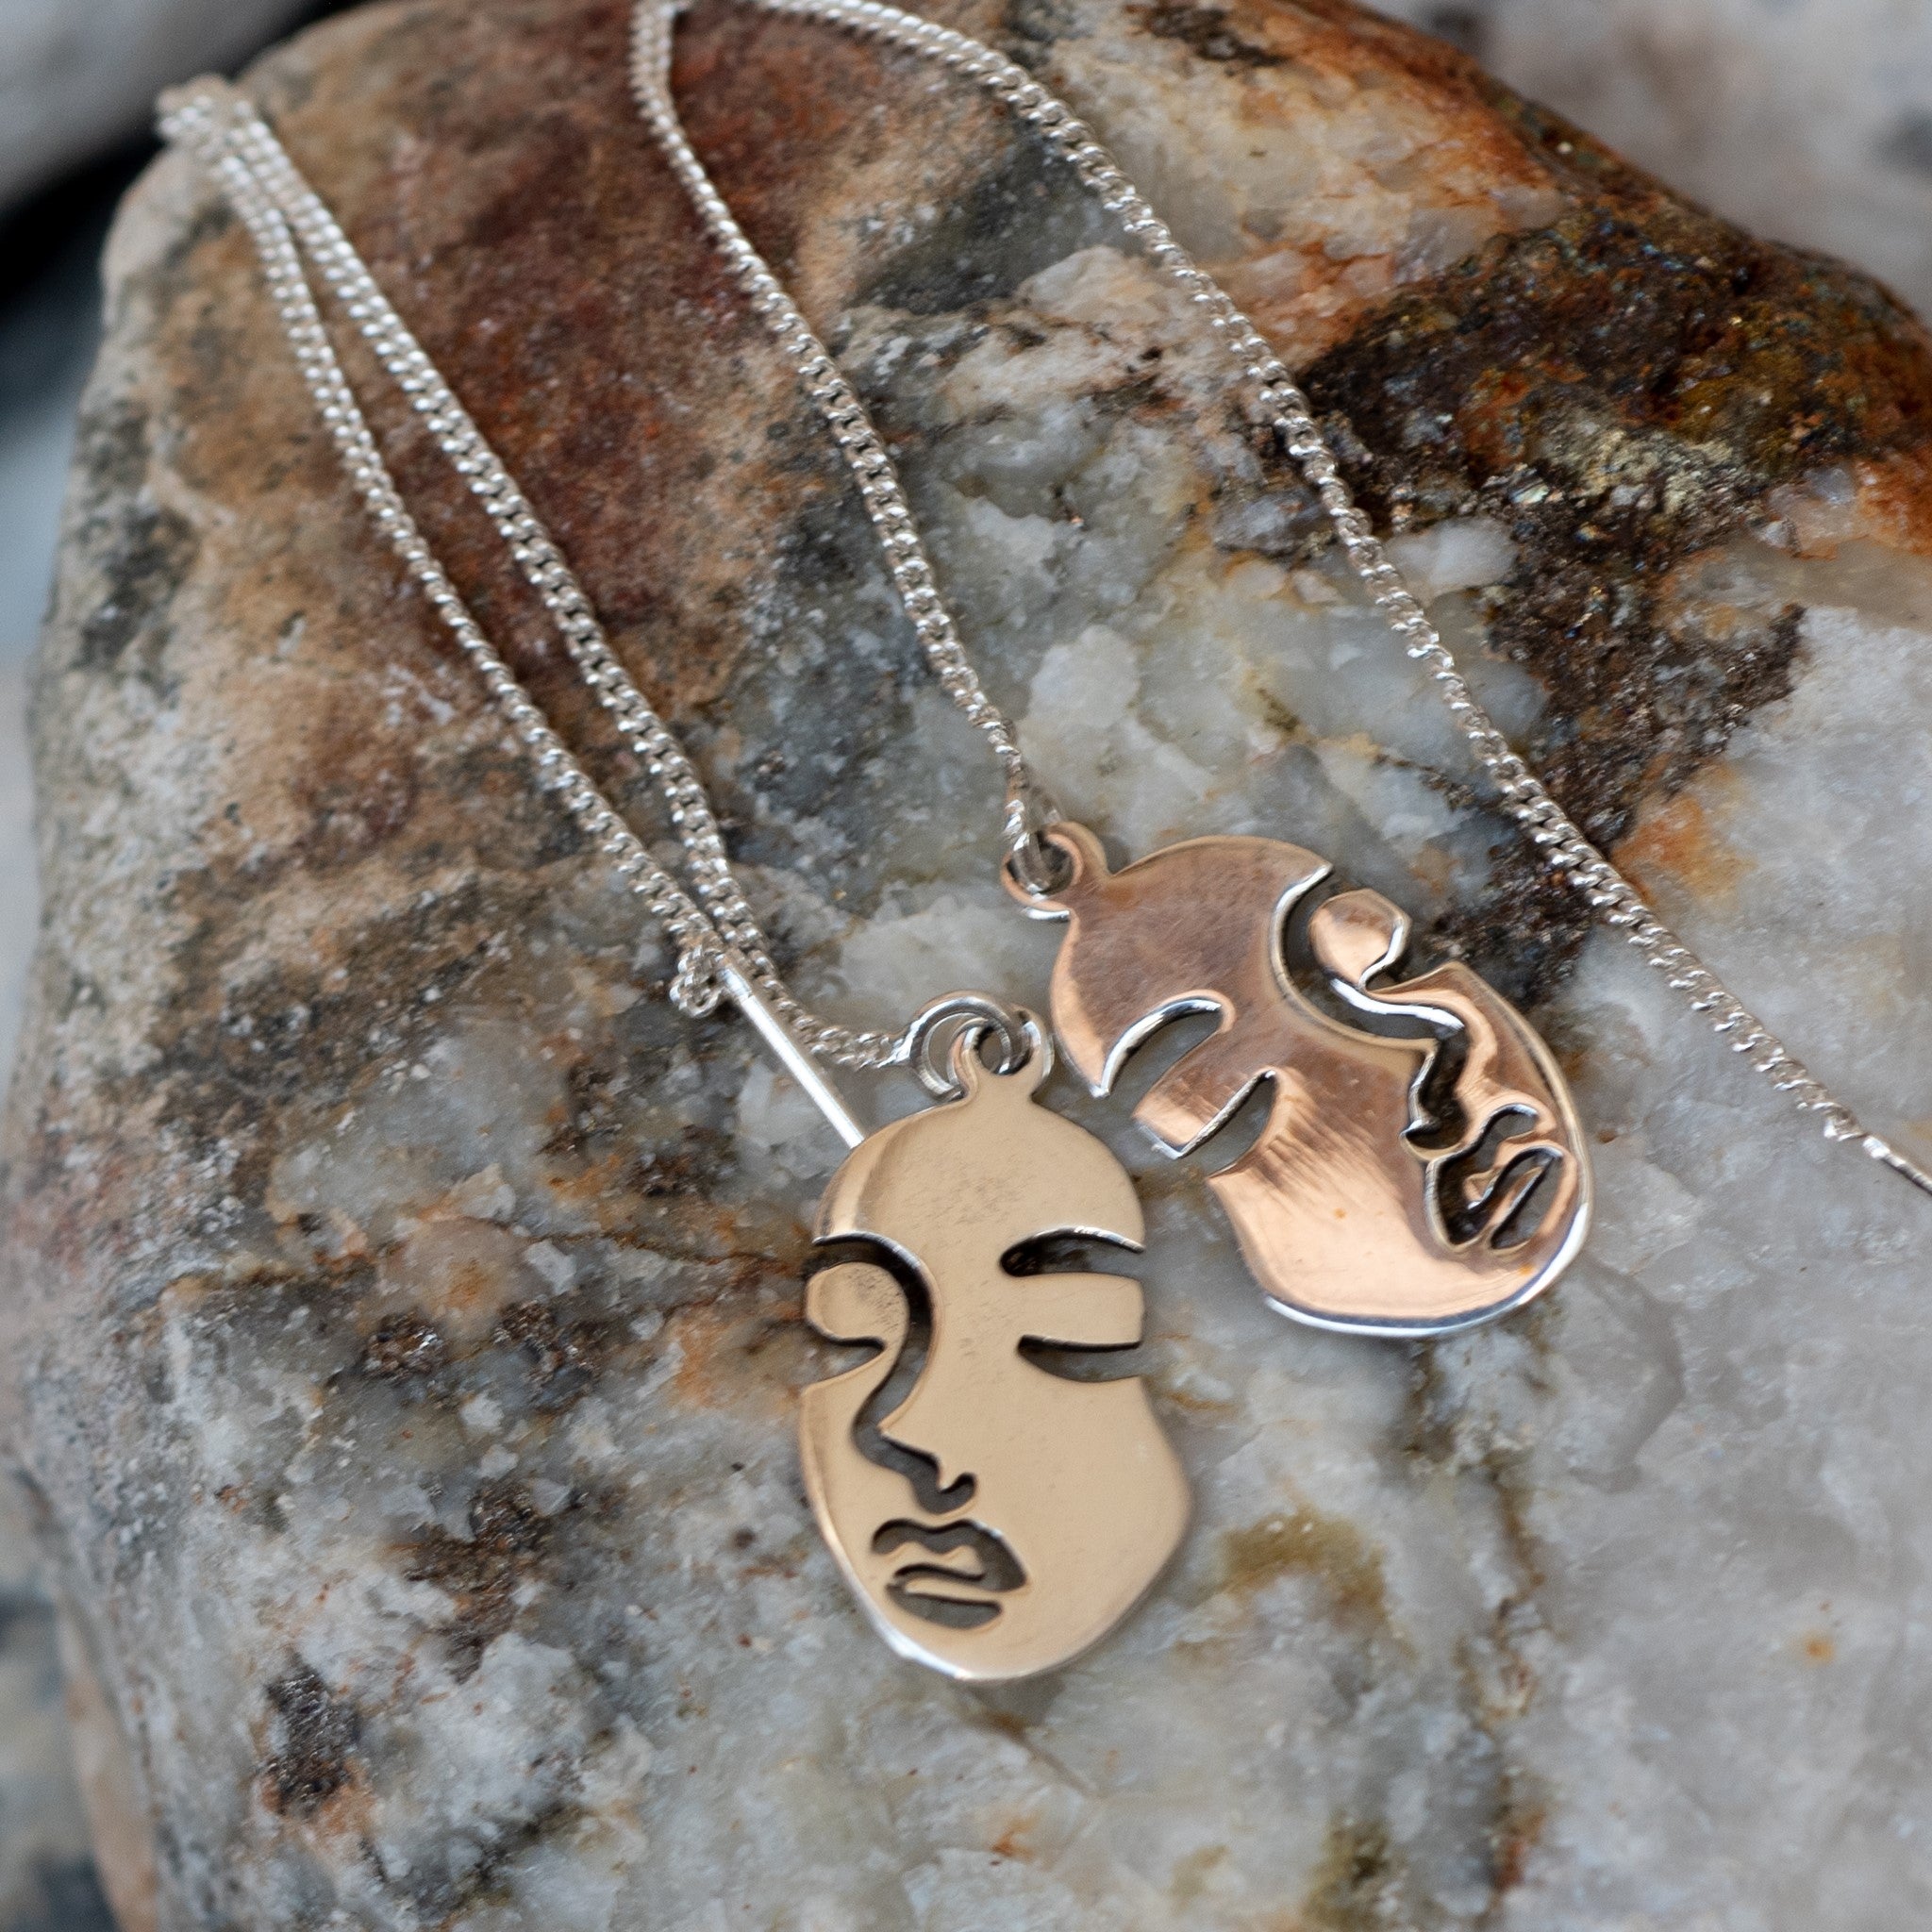 JEL019 - Sterling Silver Threader Earrings with Face